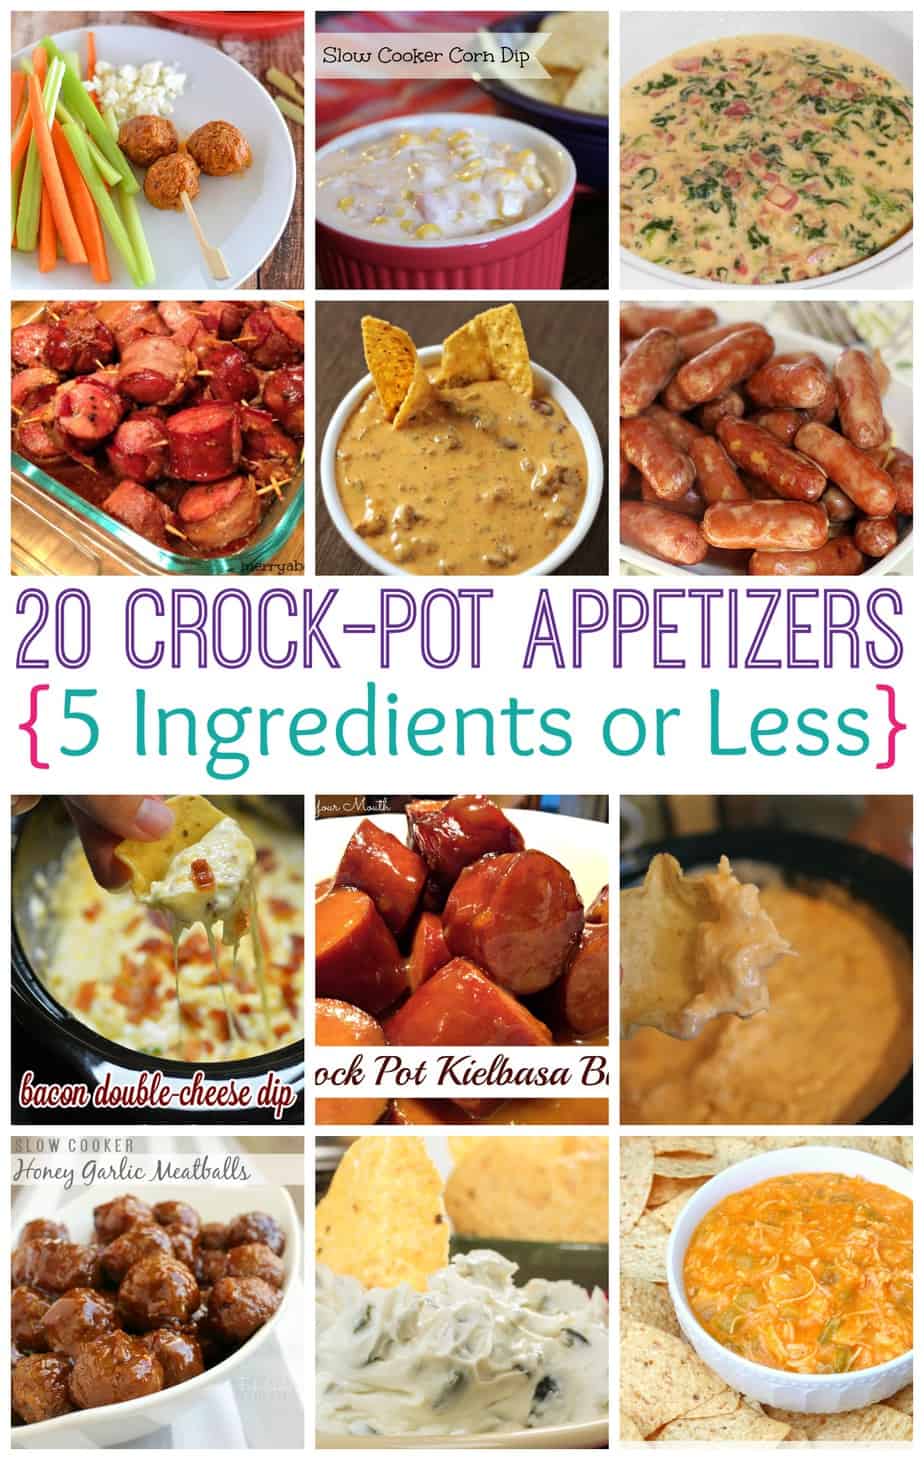 20 Crock-Pot Appetizers 5 Ingredients or Less